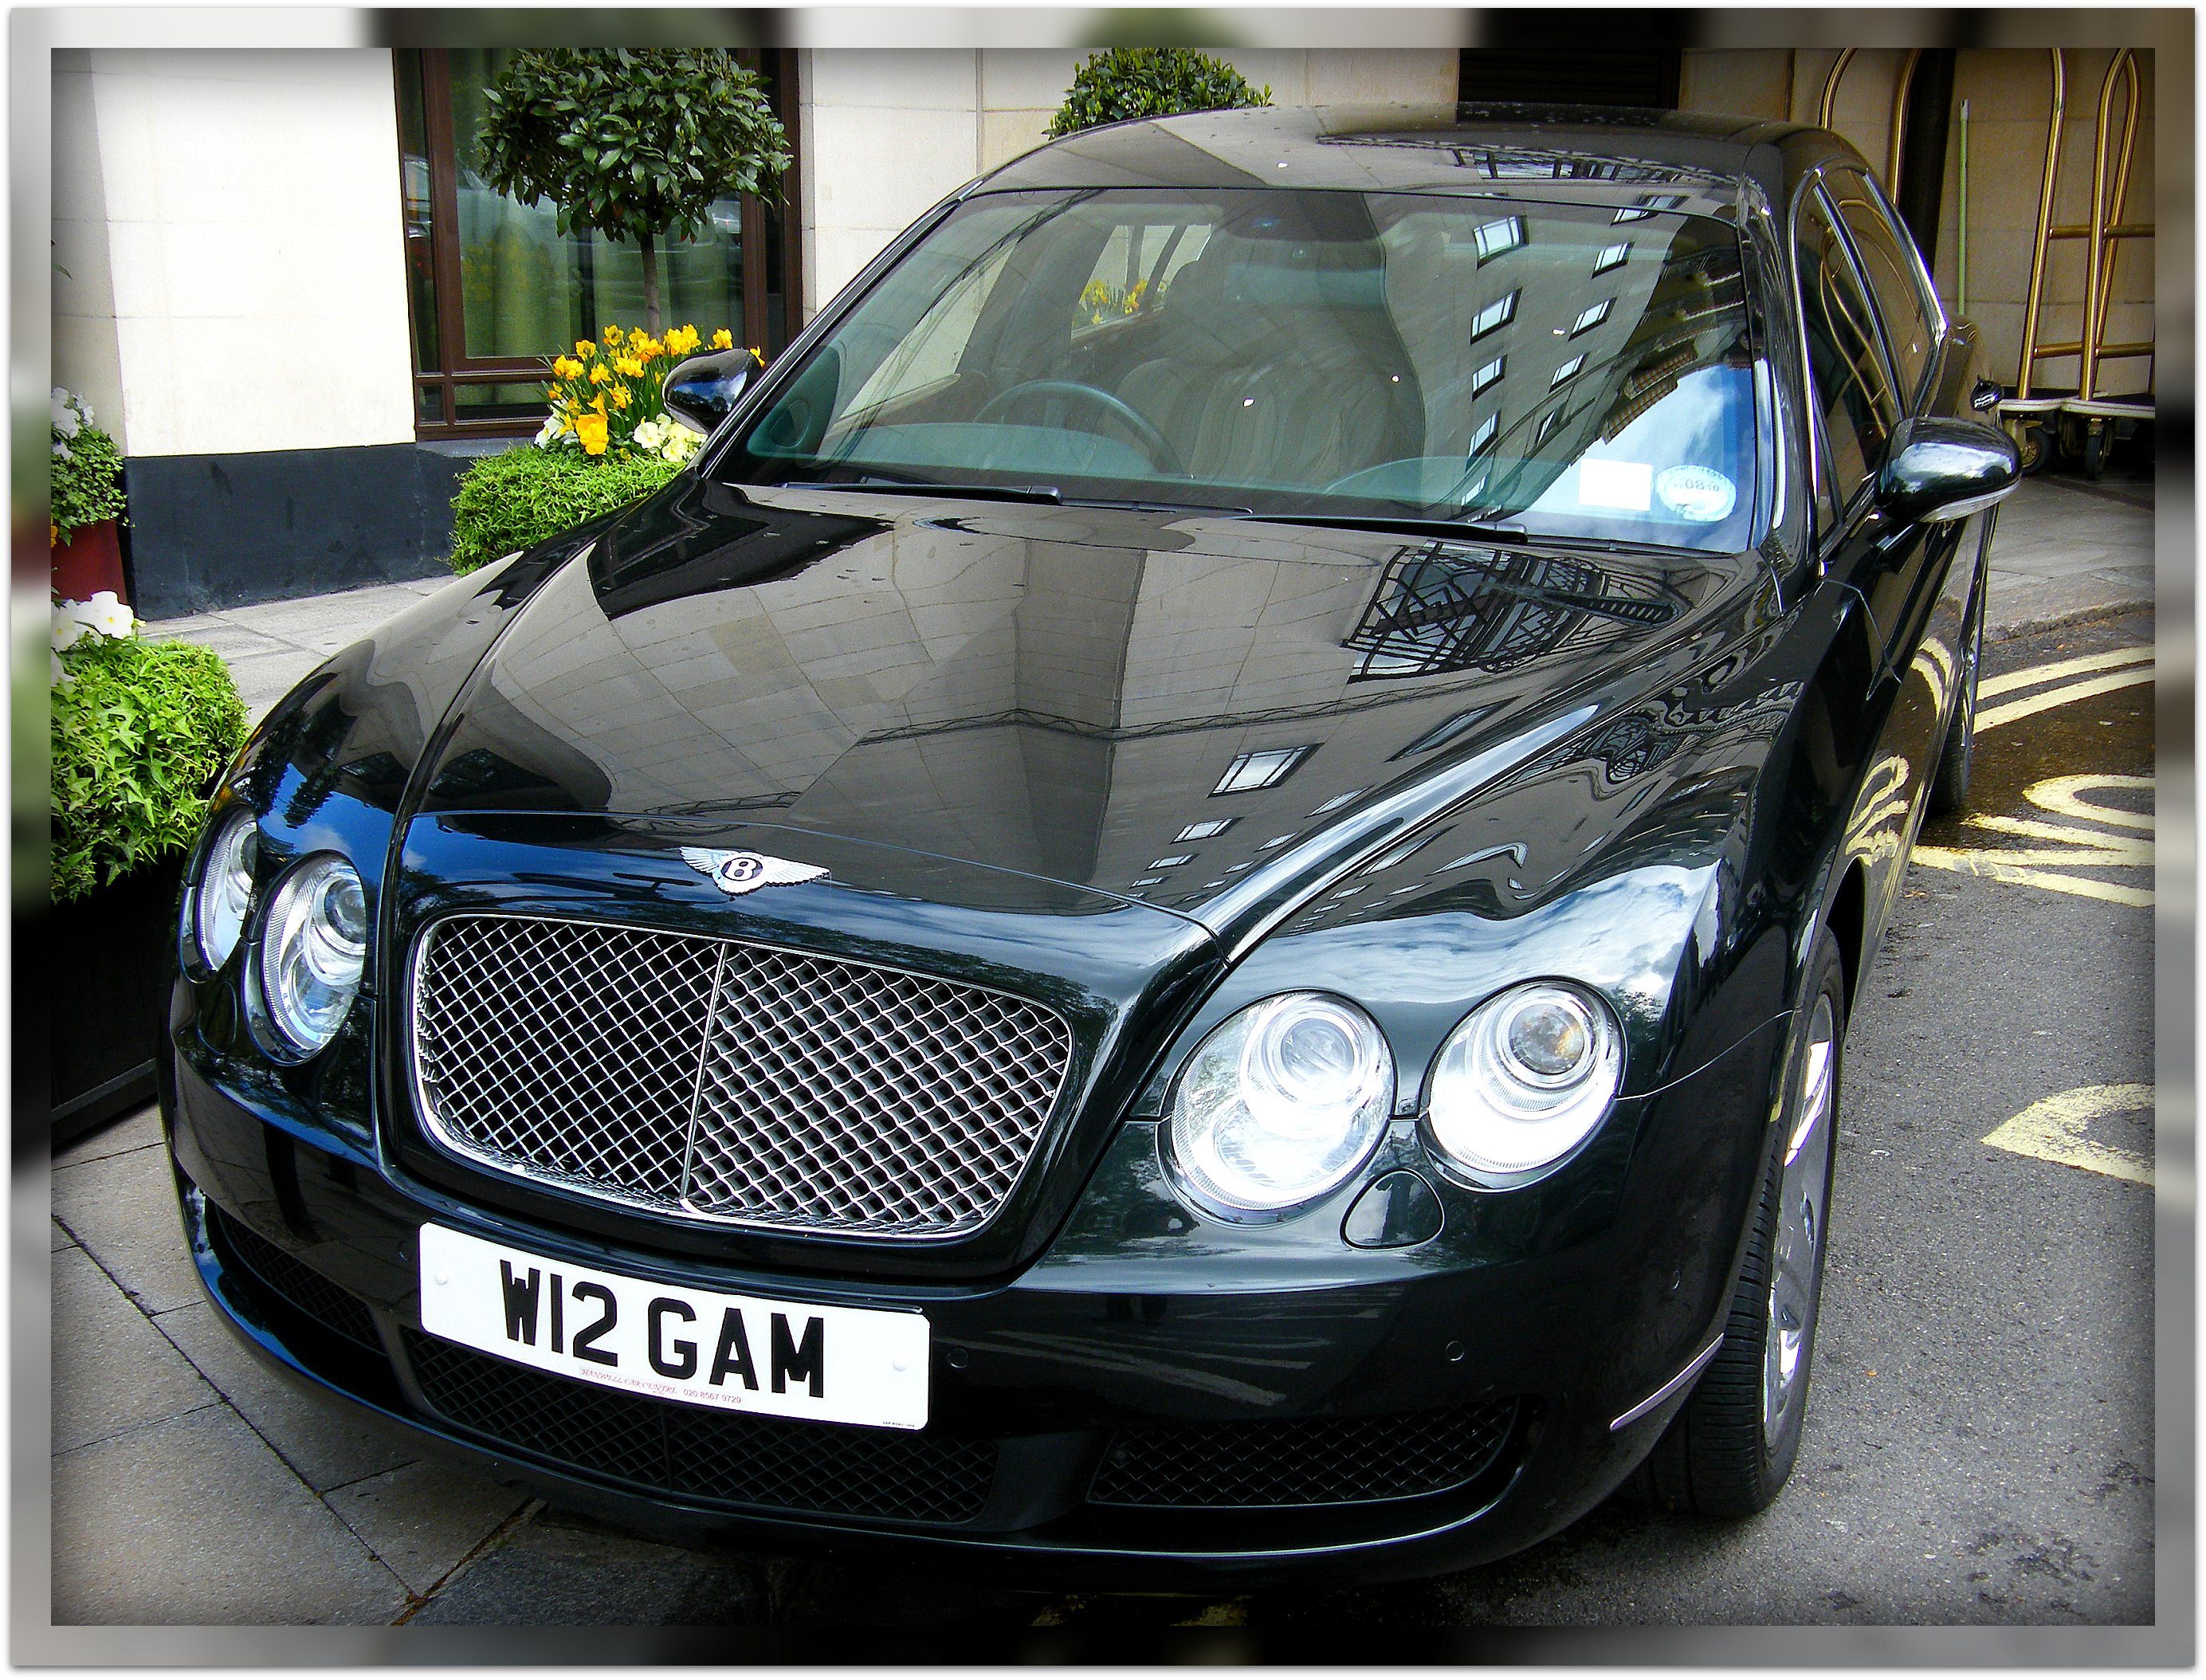 Black Bentley @ The beautiful Dorchester Hotel in London Mayfair, England United Kingdom. One of the most recognized and luxurious hotels on the planet. Enjoy! ) (4579378811)